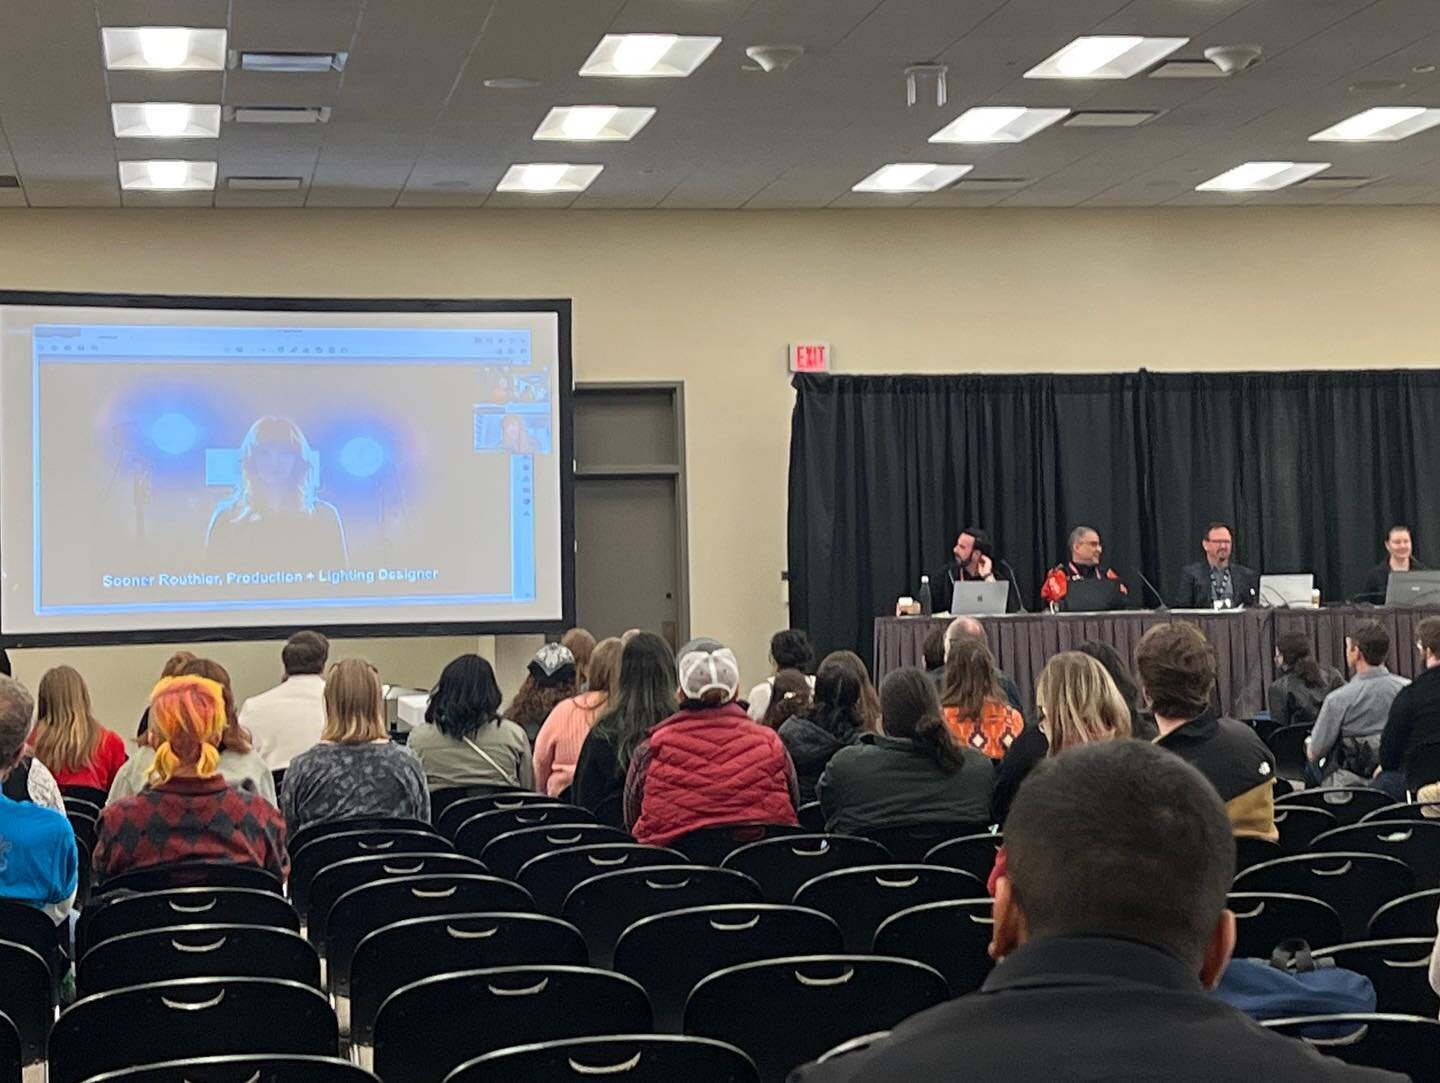 What an honor to get to speak on two panels last week at @usitt. Thank you @gatewayproductionservices and @chauvet_pro for asking me to share some of my knowledge with the next generation. Their questions and attentiveness inspire me and give me fait